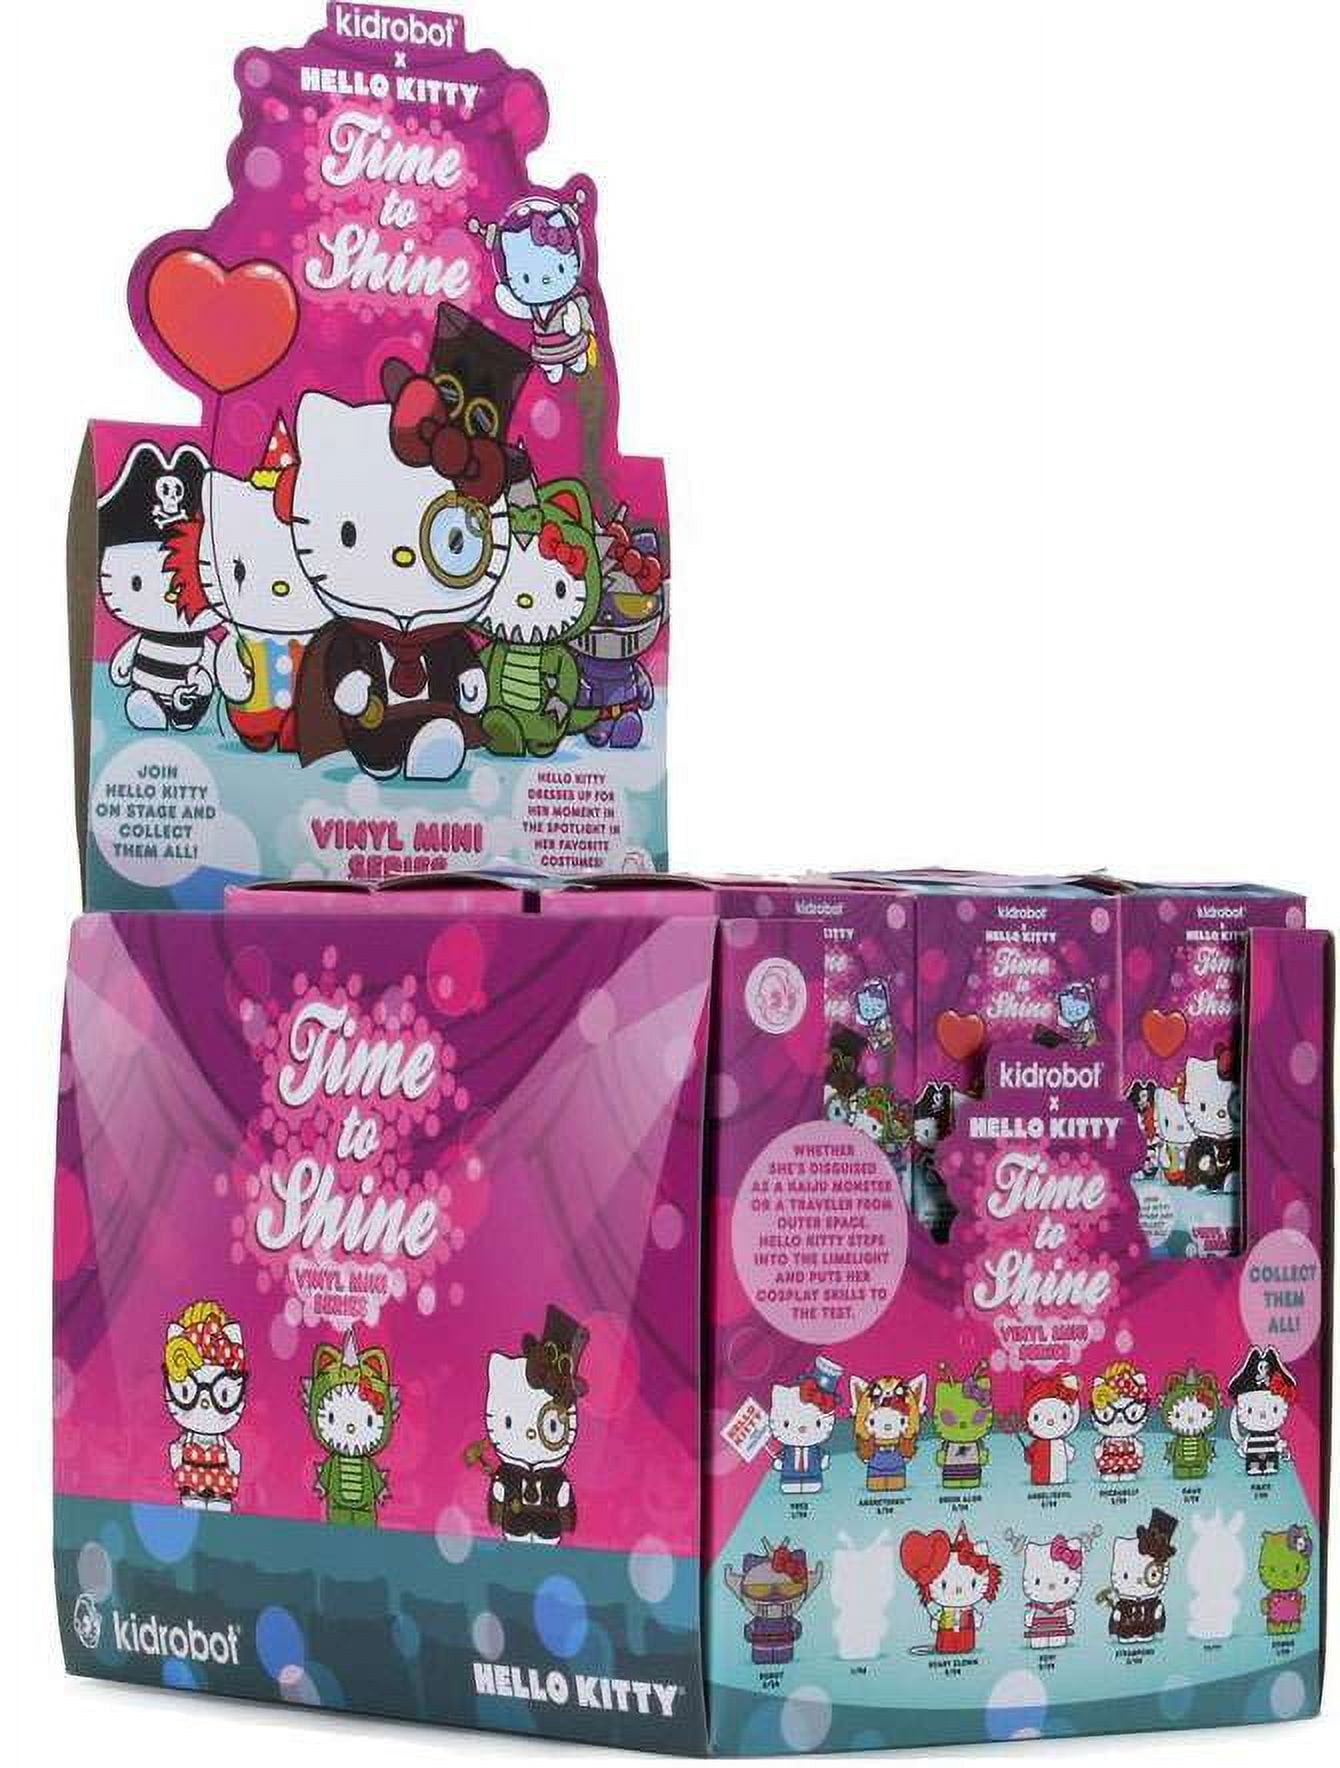 Hello Kitty Patch Series X Sports Mystery Box (24 Packs)